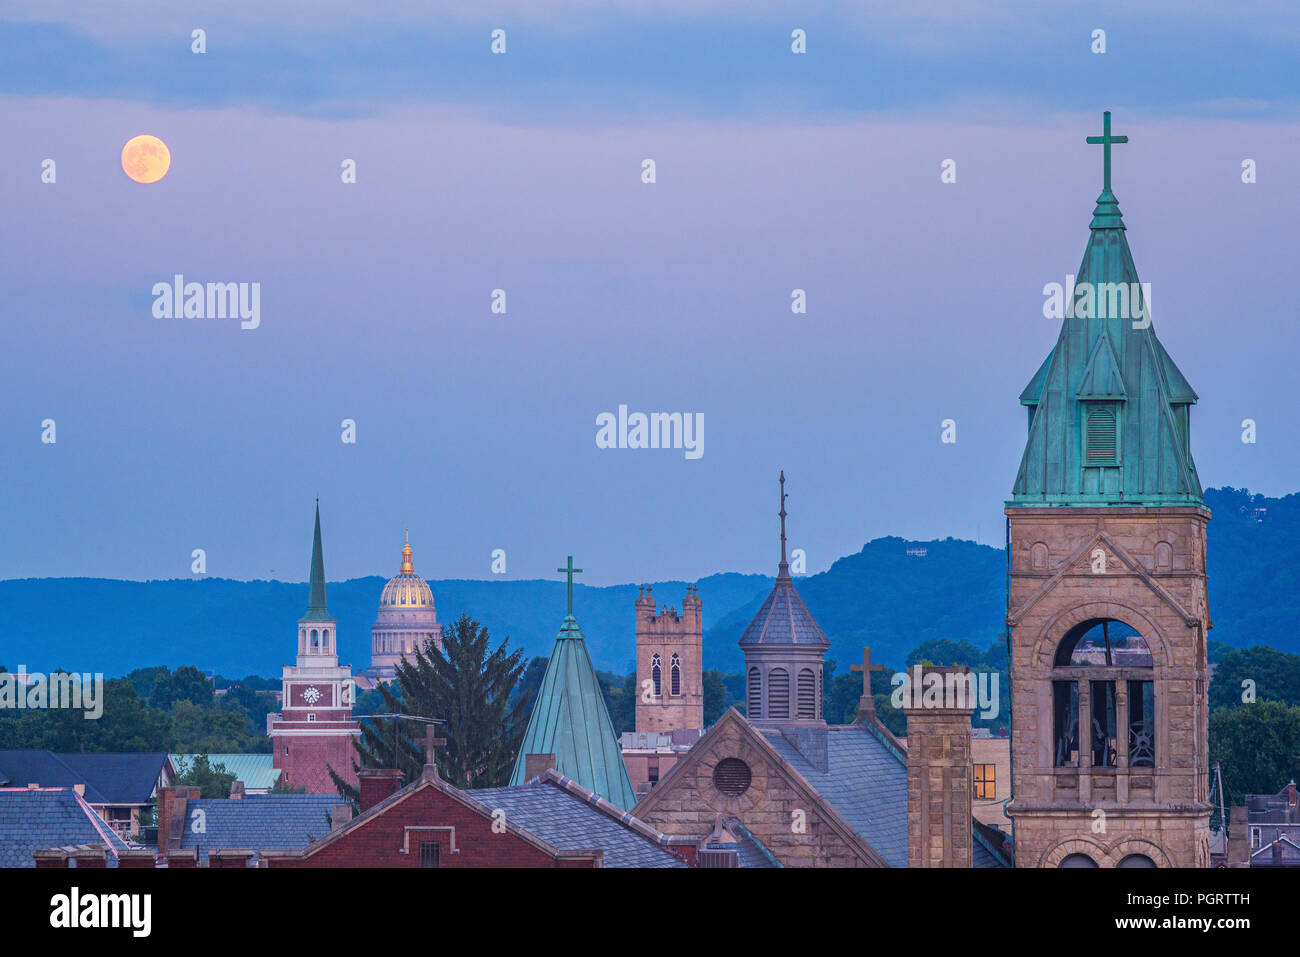 The iconic church steeples line the skyline leading to the capitol building of Charleston, West Virginia as the full moon hangs in the evening sky. Stock Photo